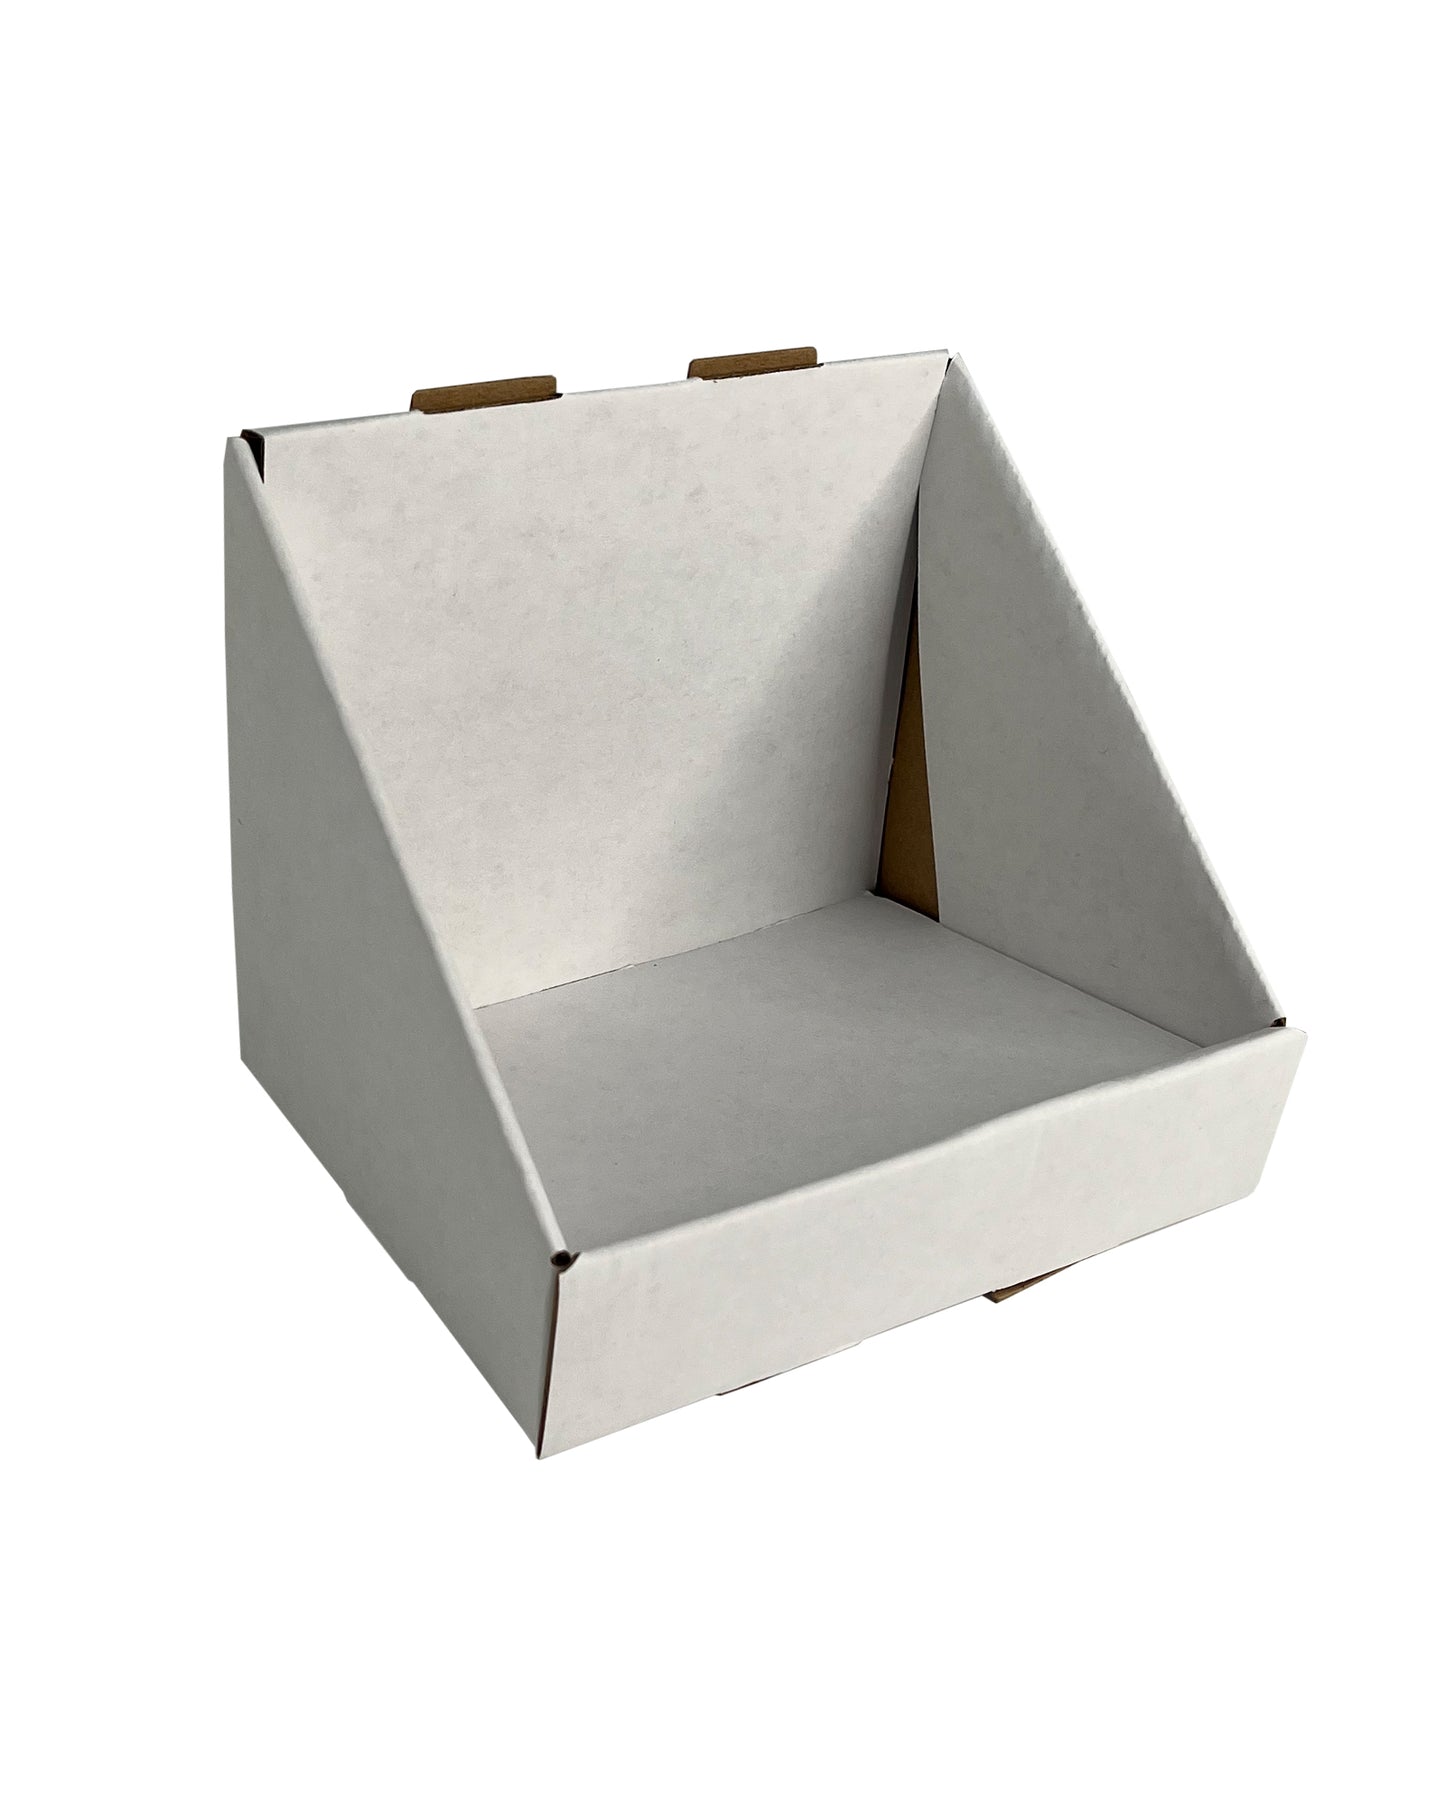 1-Pocket White Counter Display - 6 inches wide